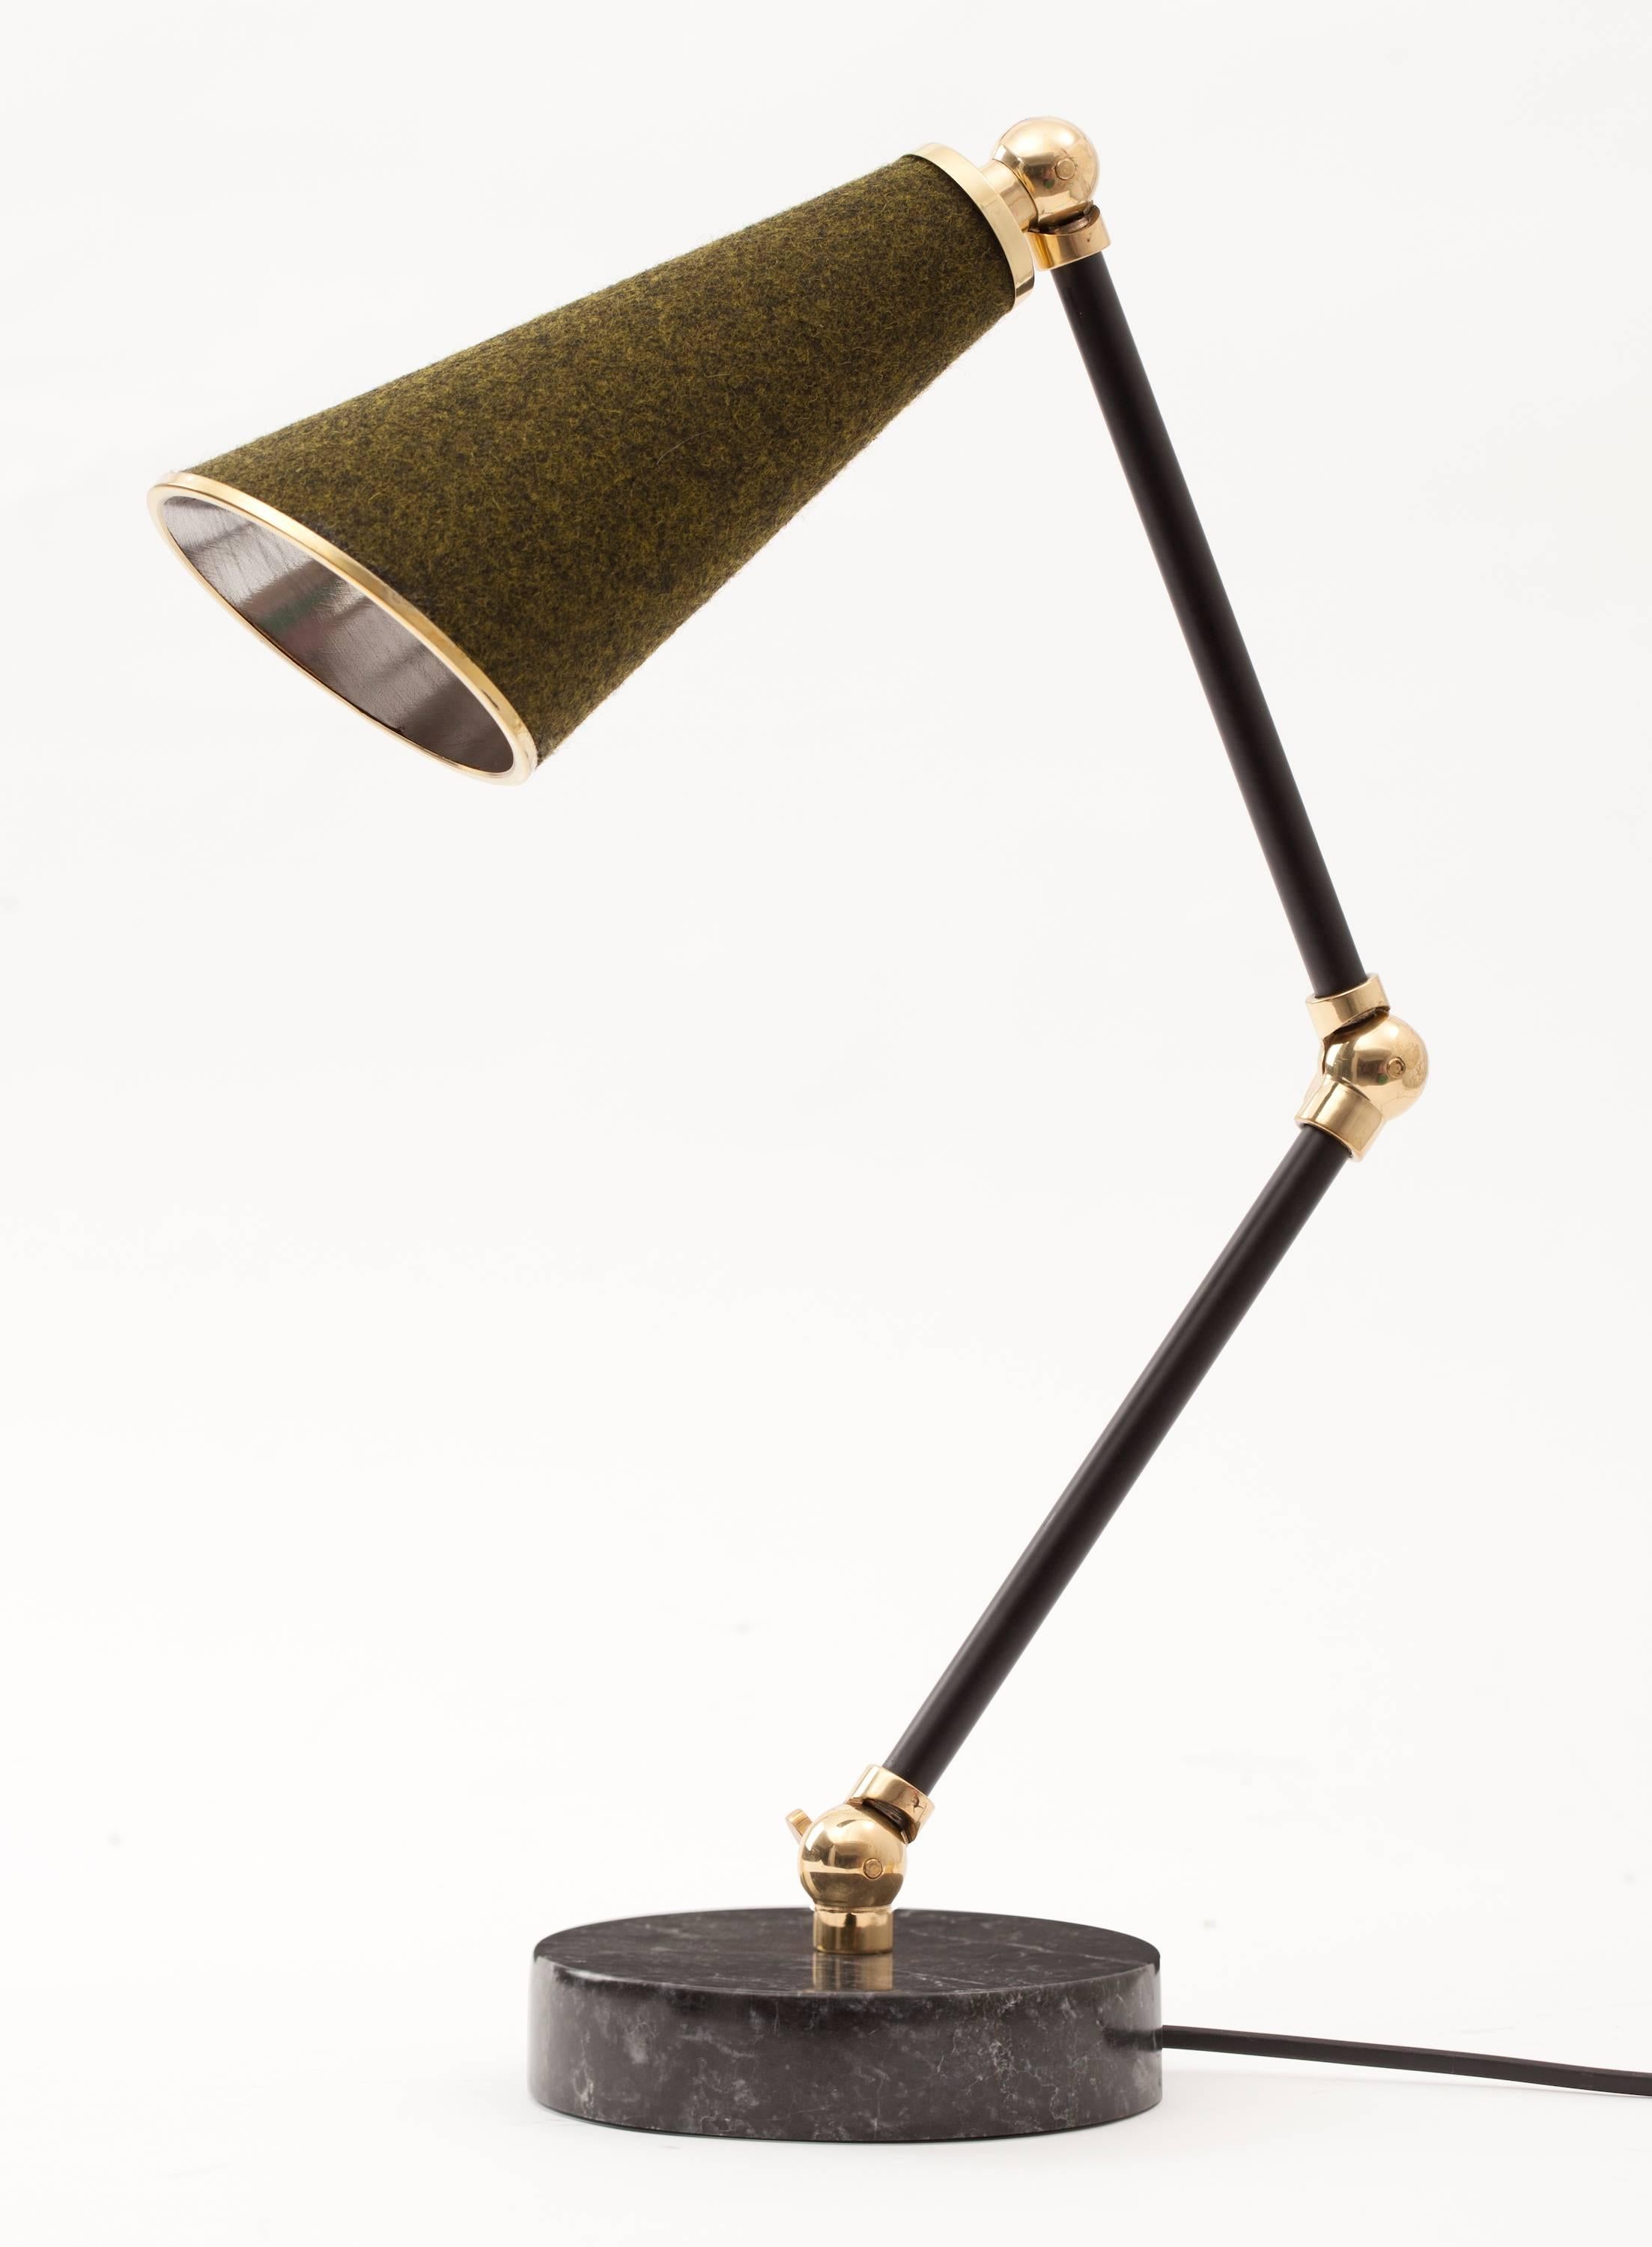 The uniquely designed Lanterna lamp by NY-based designer Merve Kahraman is a new age robot desk lamp or table lamp with a heart.

Unique textured materials such as felt, cork and cowhide are combined with white and black coloured marbles and shiny